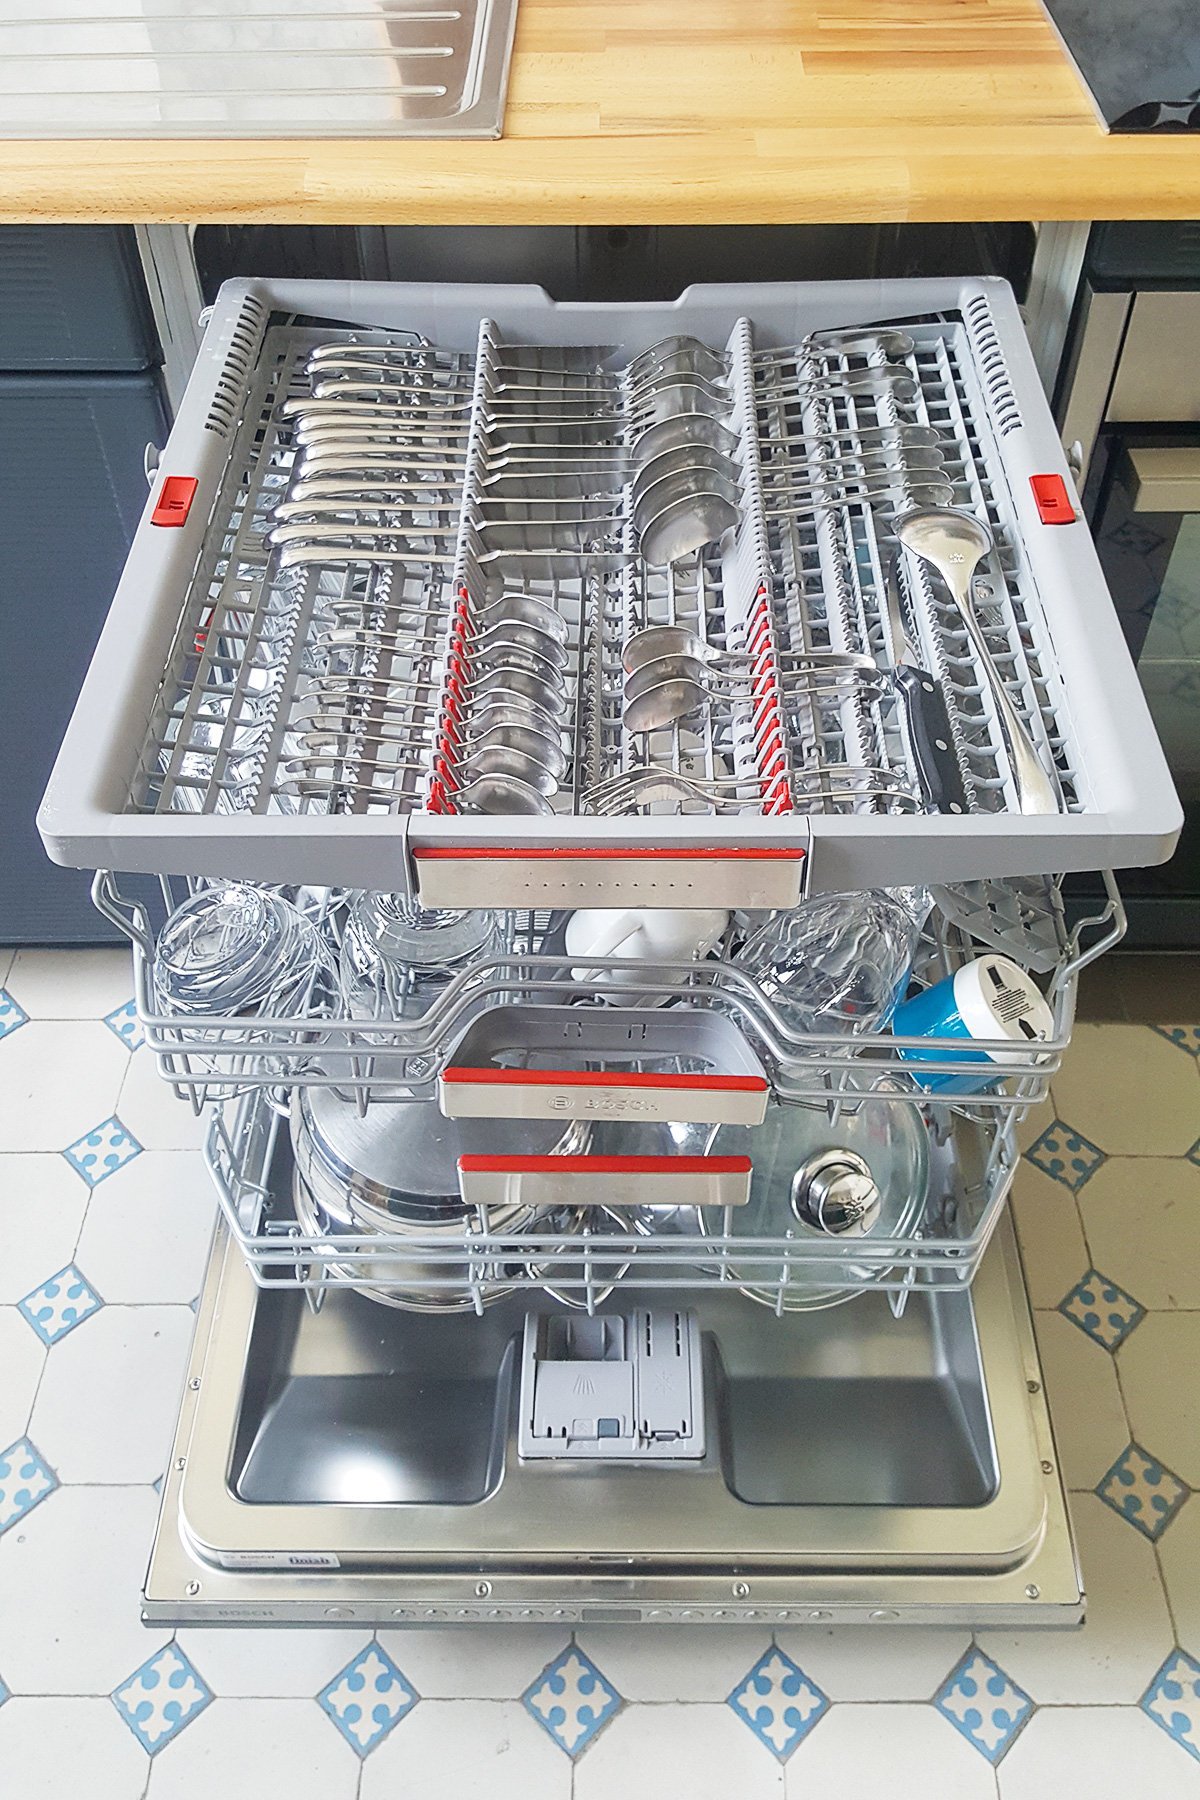 bosch dishwasher series 6 review